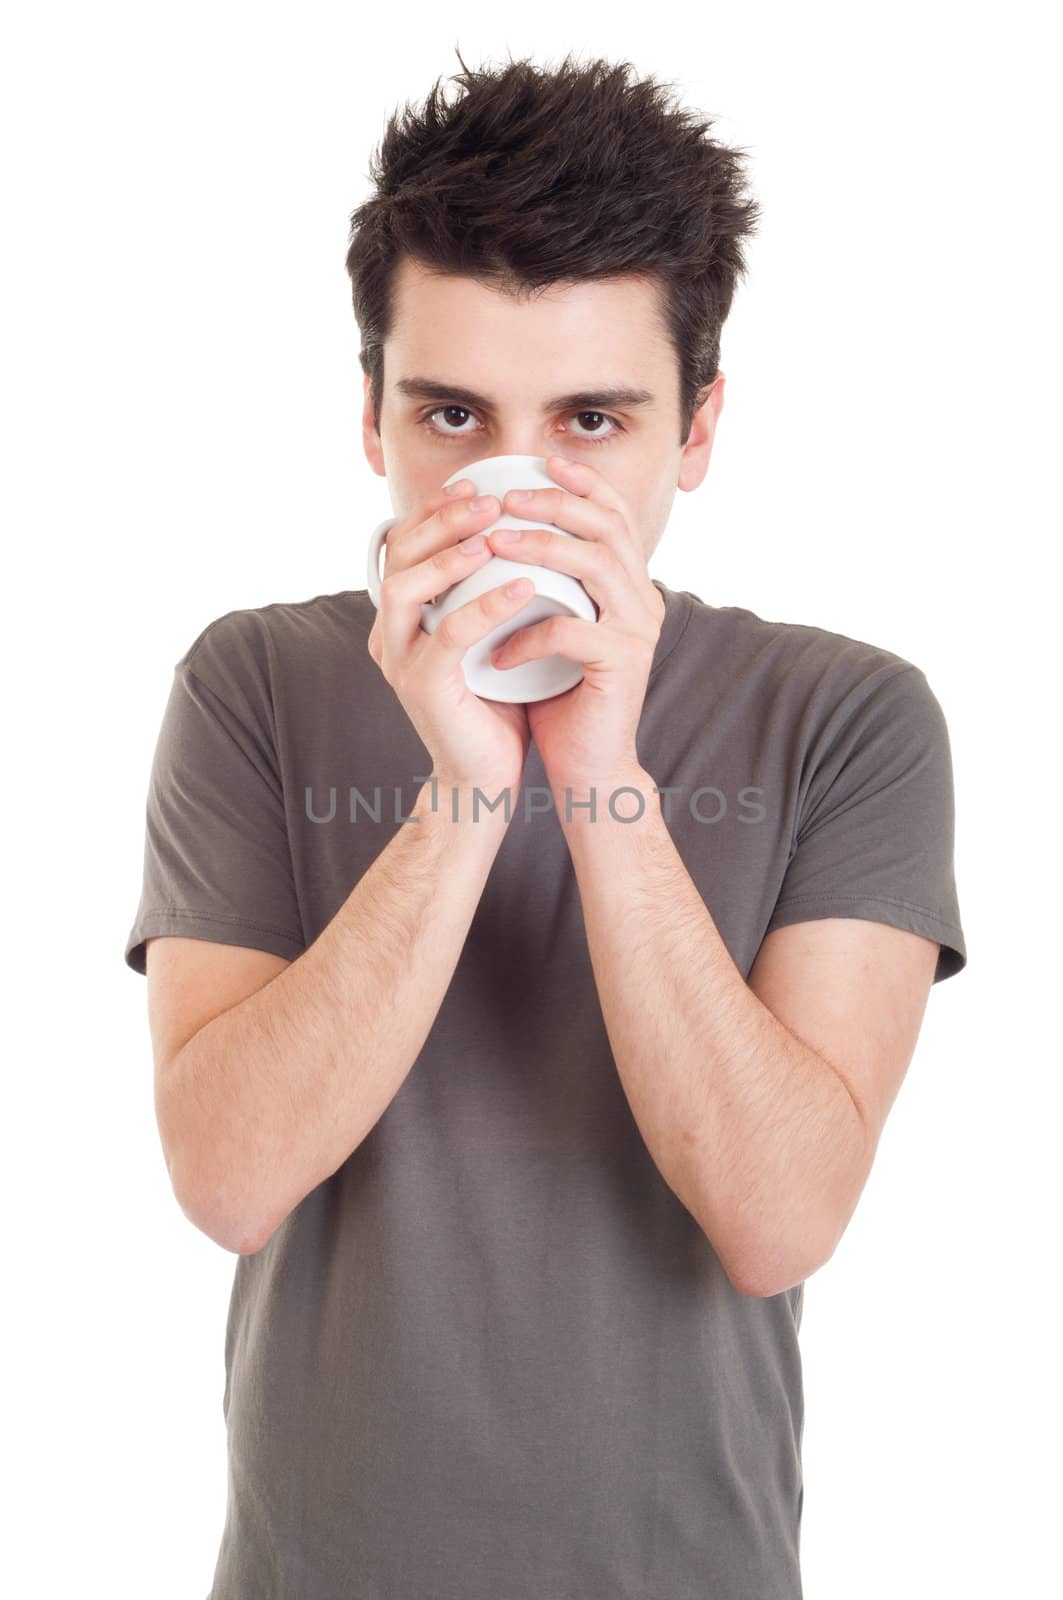 lovely handsome casual man drinking coffee/tea mug (isolated on white background)